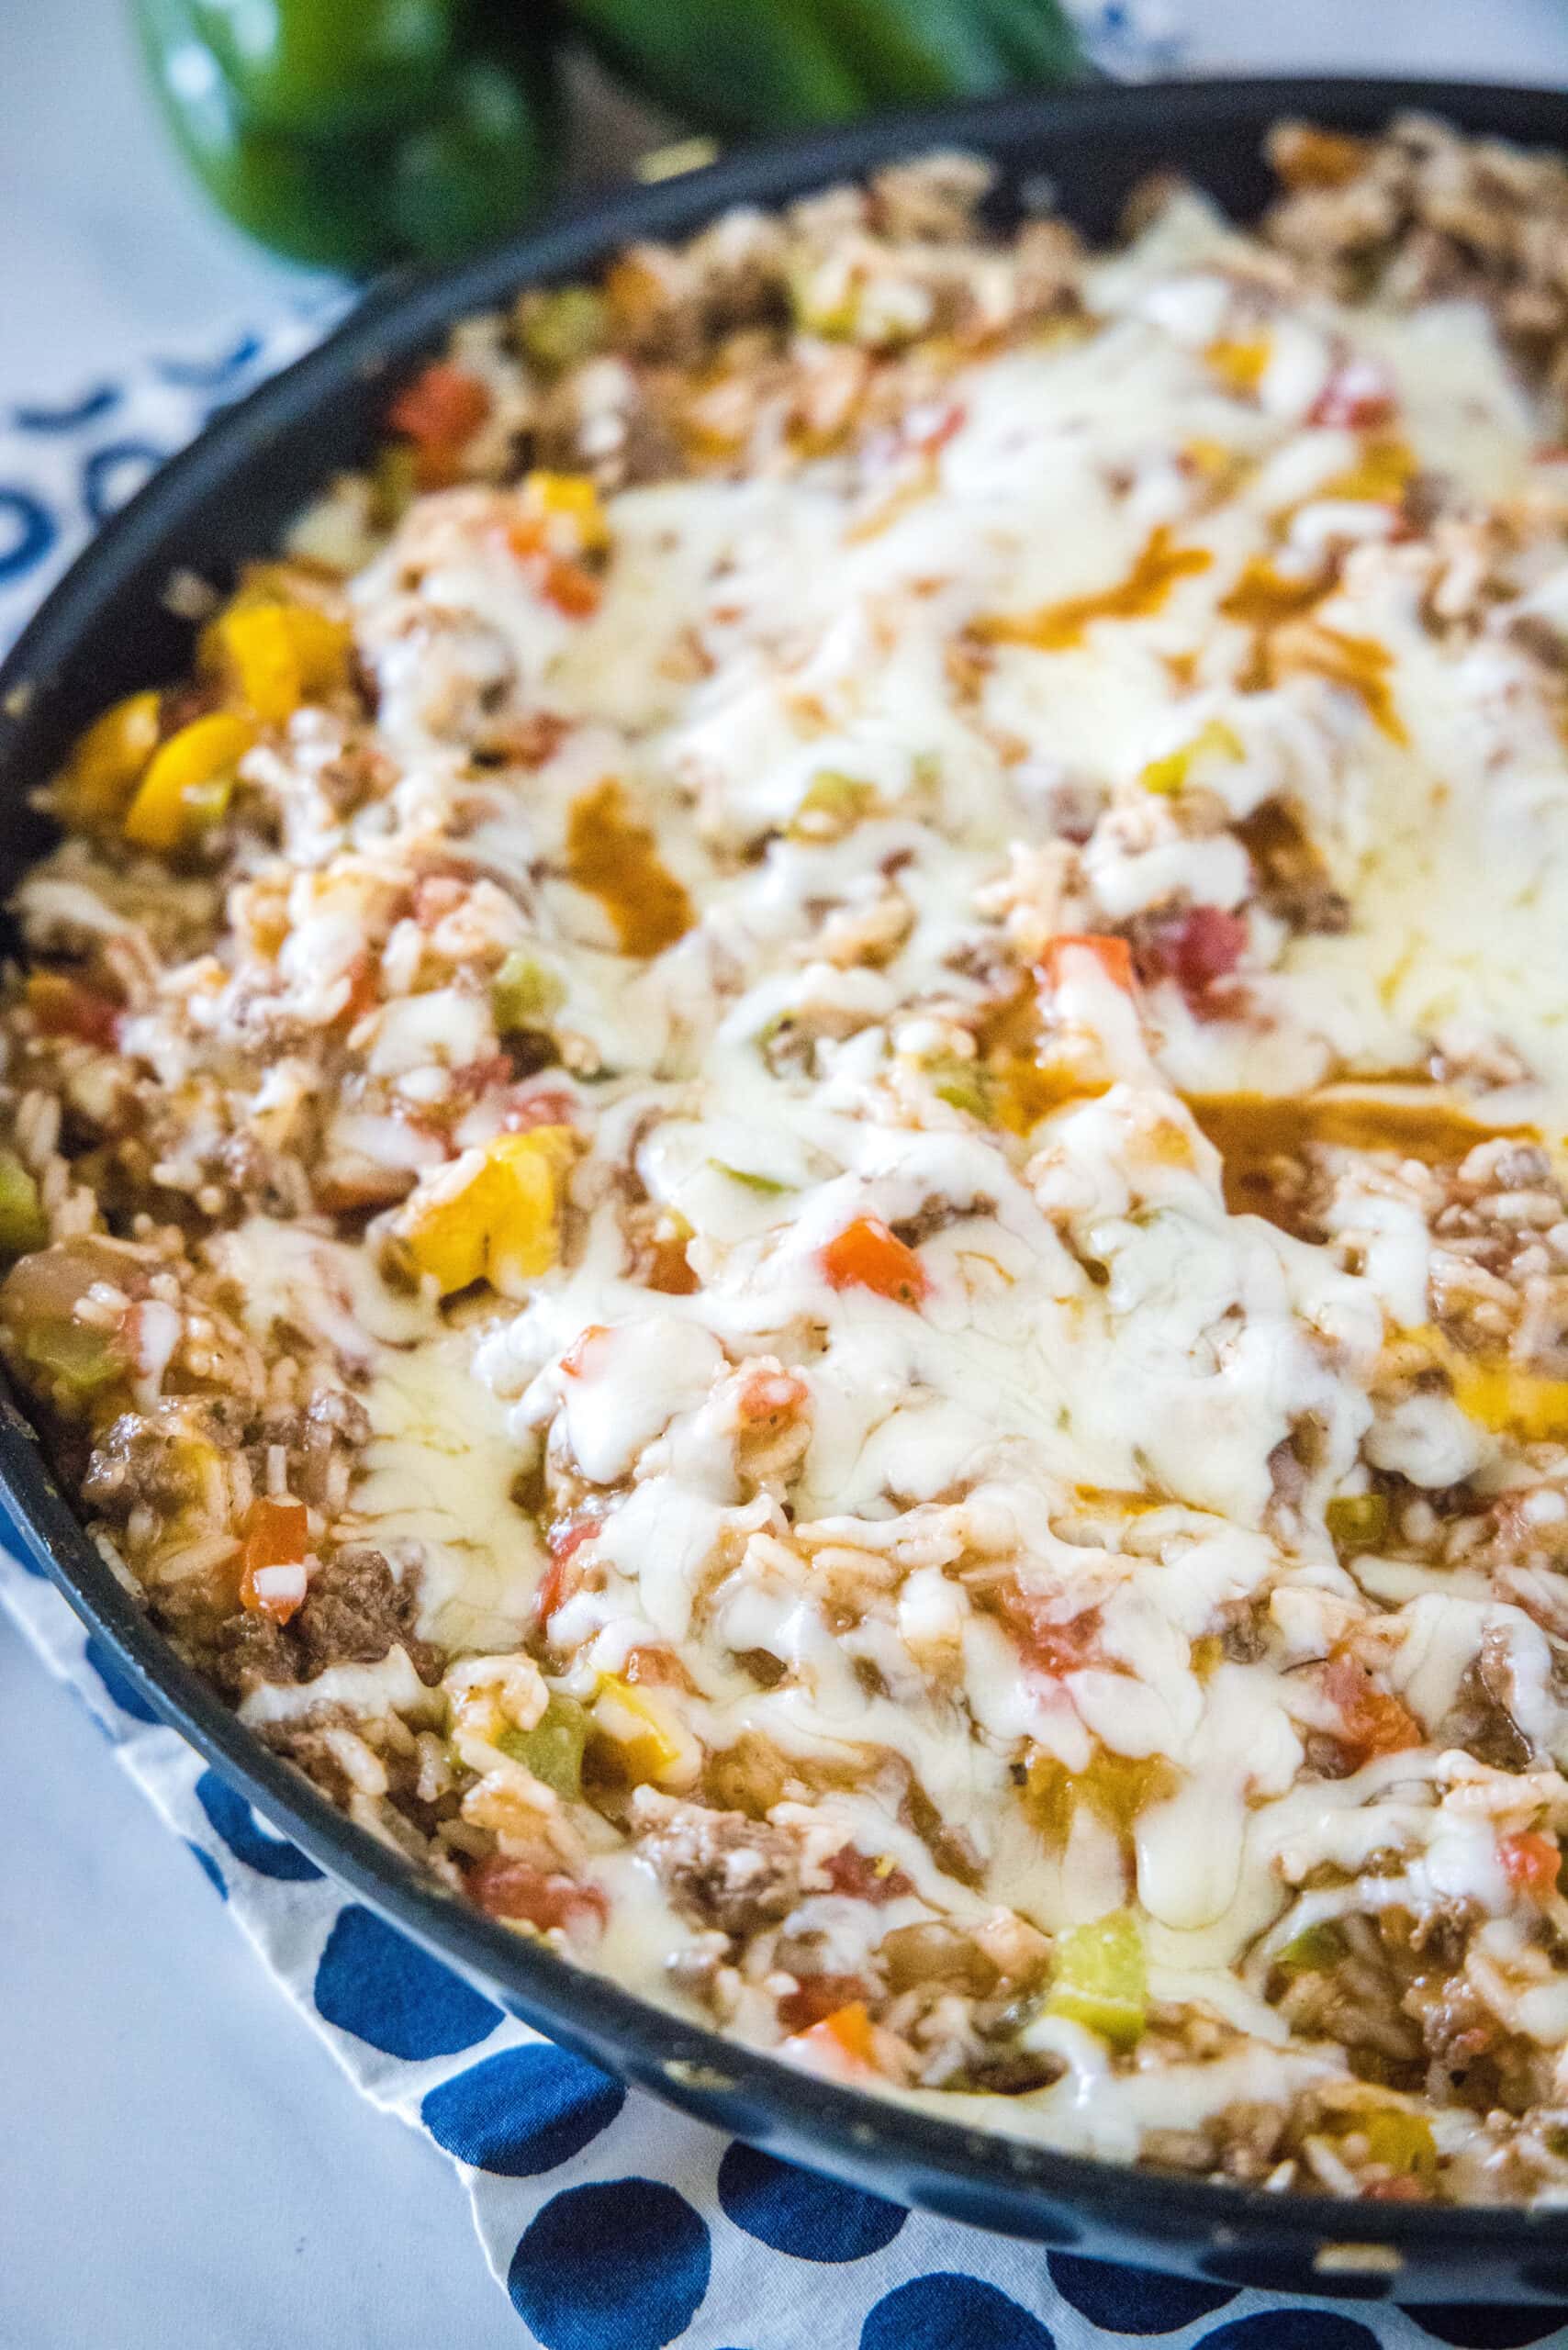 a skillet with melted cheese over ground beef in it